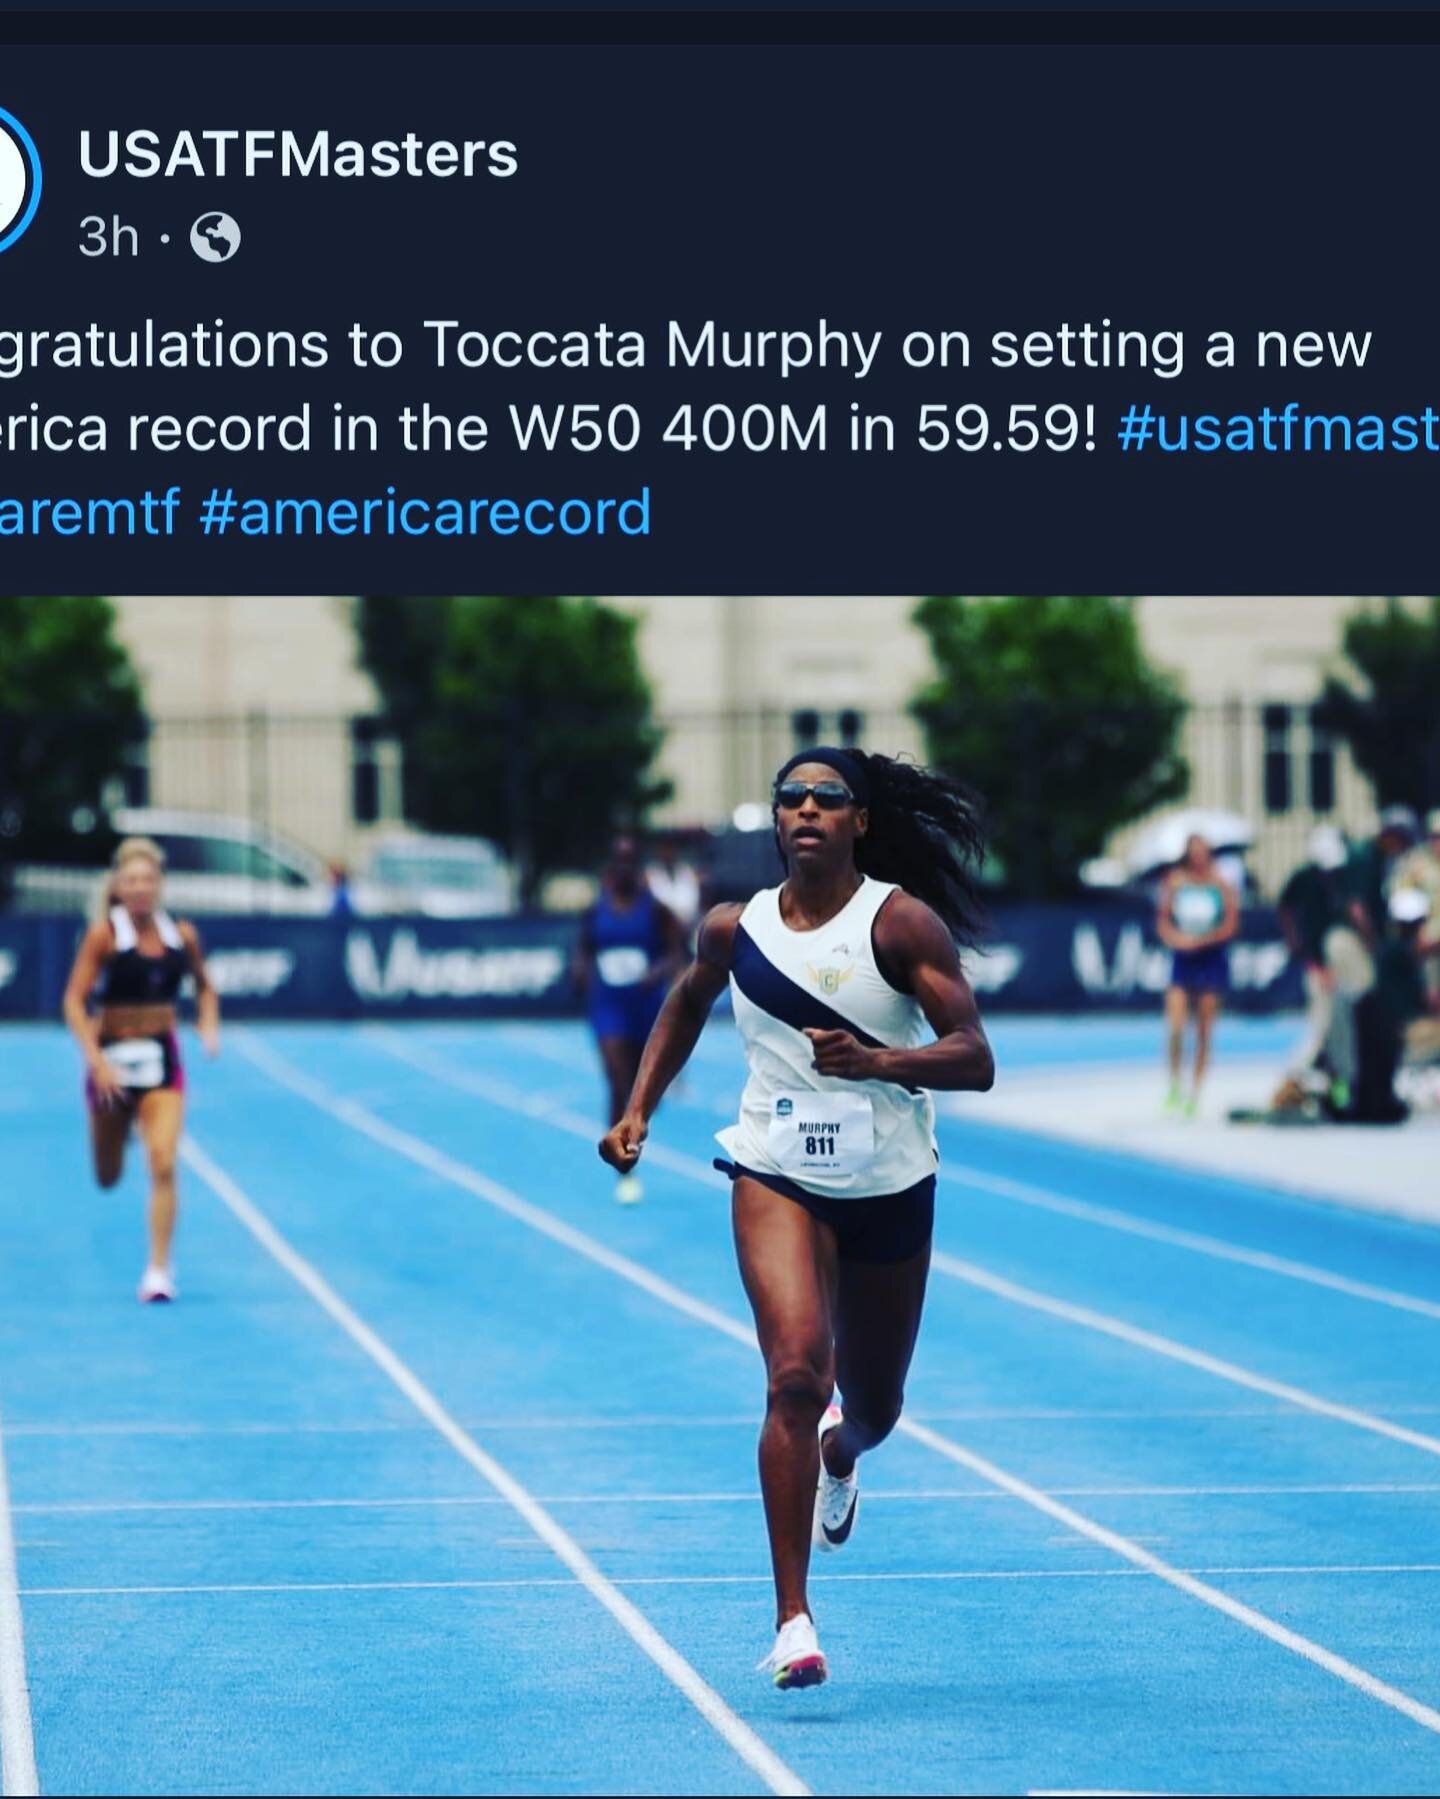 Congratulations to OPTC patient @toccatamarie who set the American record in the 400m W50 this past weekend. Toccata is the fastest woman in the country 50 or older! Incredible. Hard work pays off! 🏃🏾&zwj;♀️💨 
&bull;
#runningcommunity #runninginju